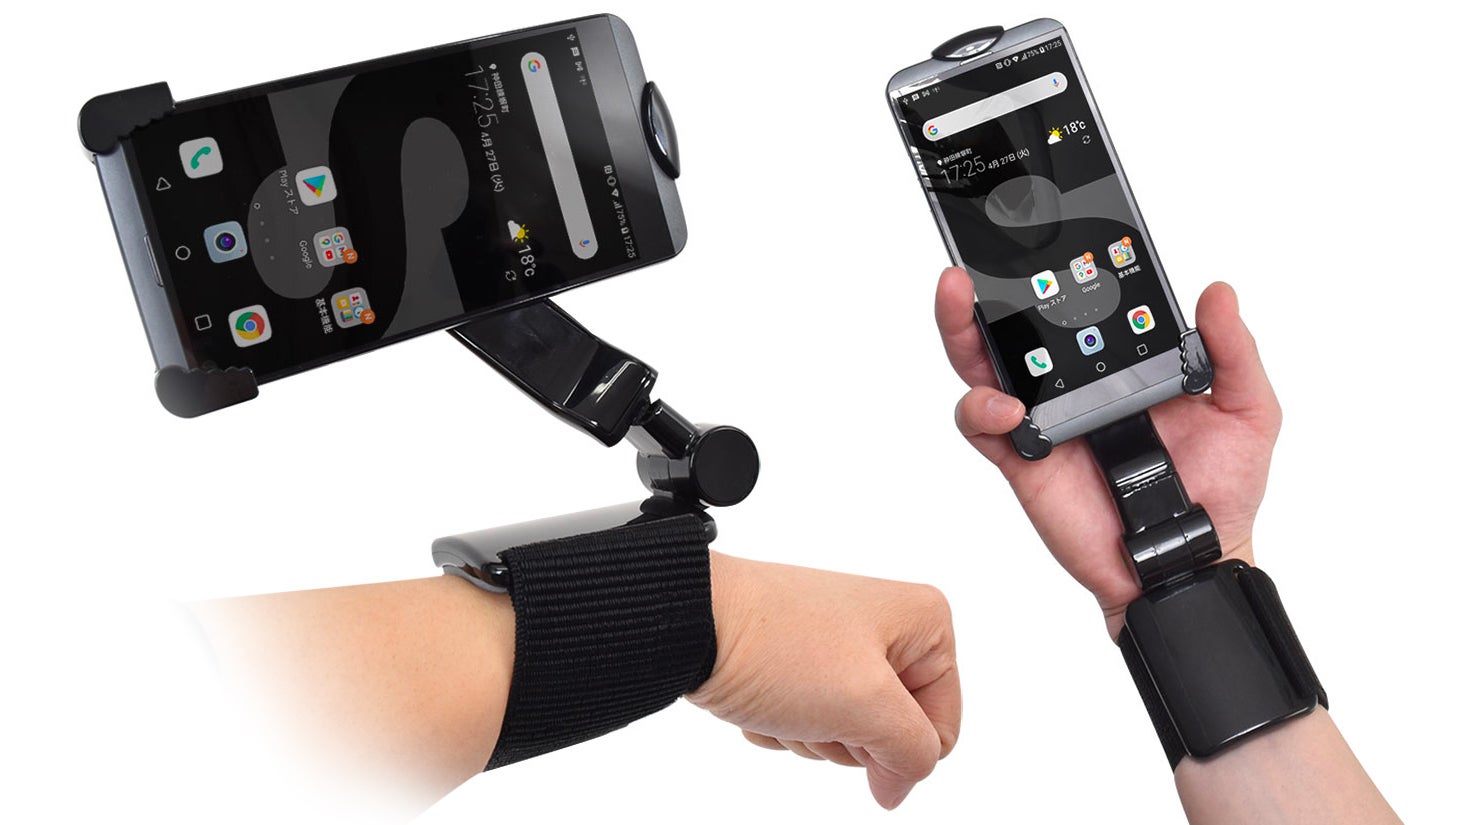 You Laugh, but This Smartphone Arm Mount Might Actually Be Useful